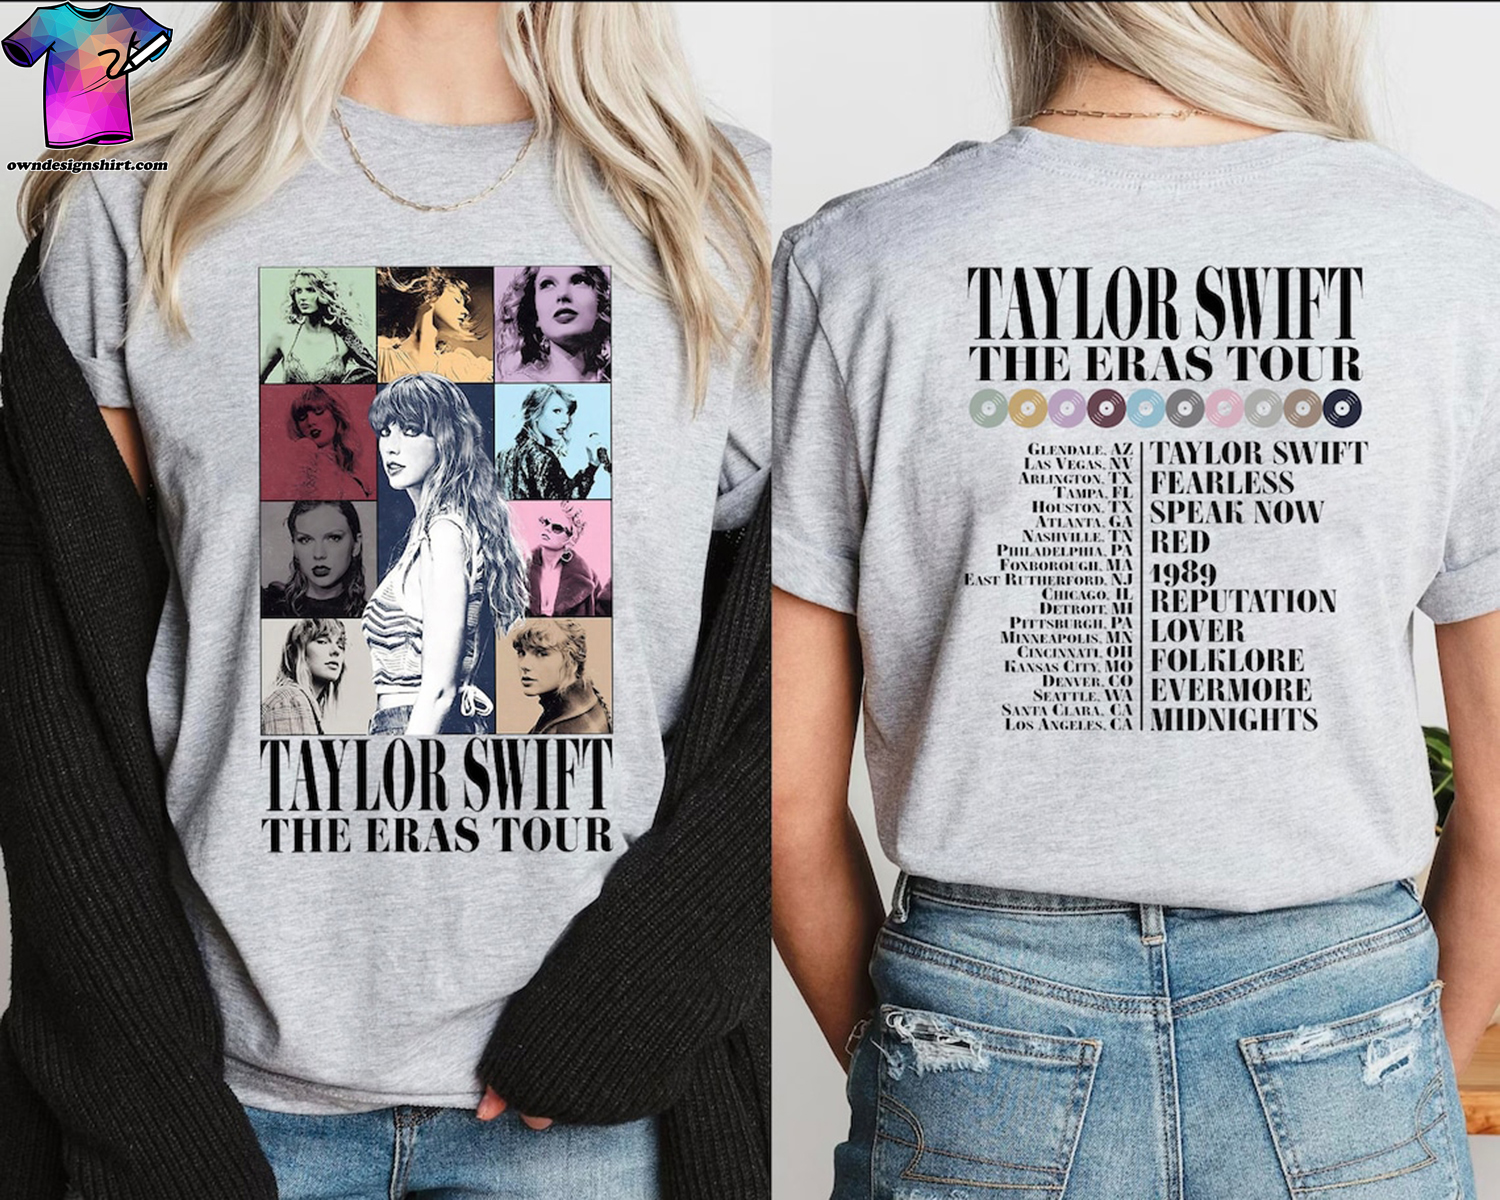 A Decade of Magic Unveiled The Eras Tour Concert by Taylor Swift and the Iconic Concert Shirts